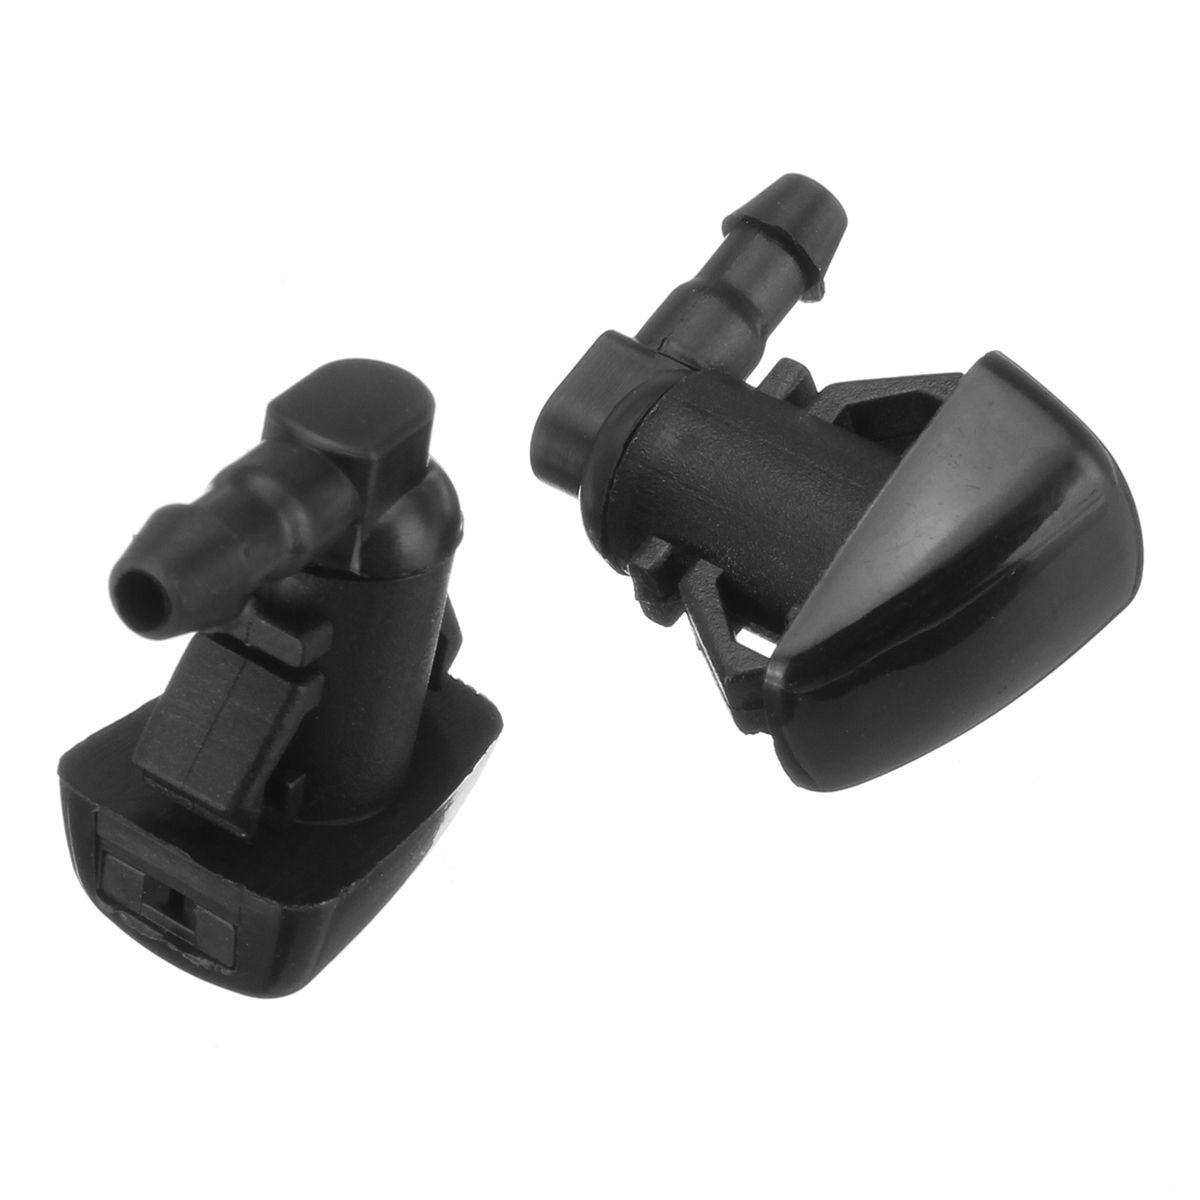 2Pc-Windshield-Wiper-Water-Spray-Jet-Nozzle-For-2007-2010-Ford-Edge-7T4Z-17603-A-1574905